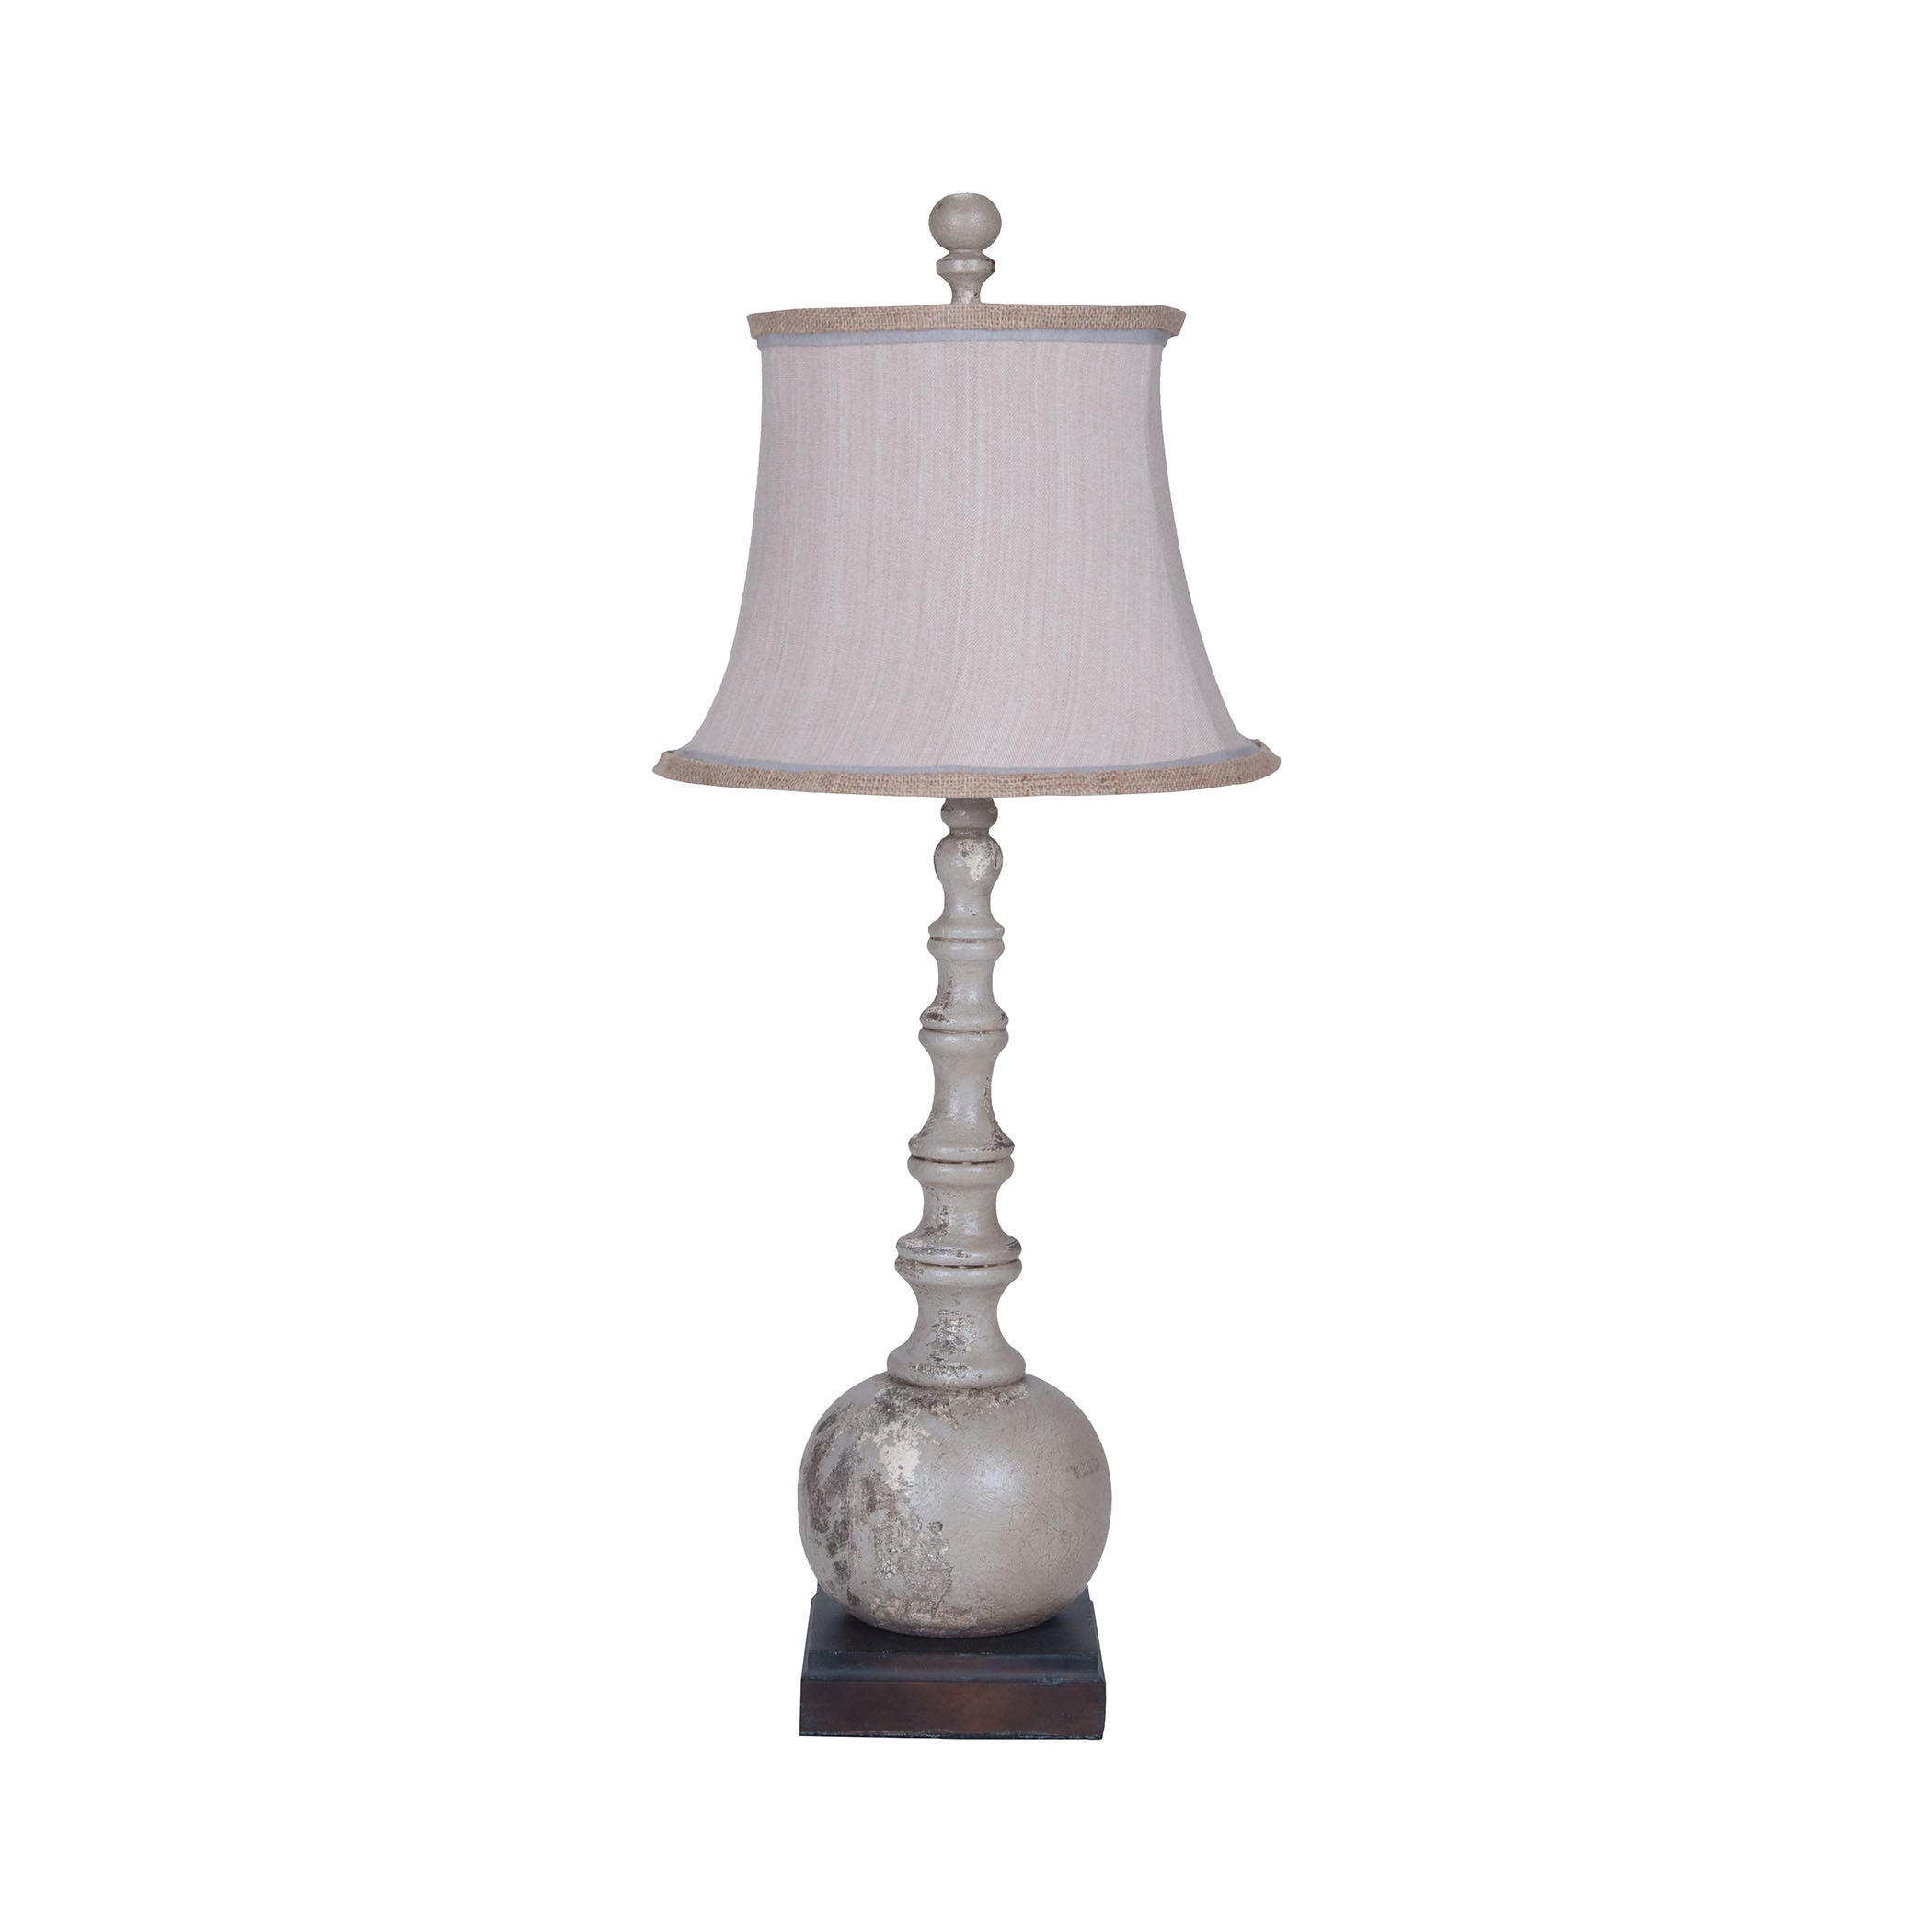 Guildmaster Gui-3516037 Marrakesh Collection Vintage Gris,weathered Grey Finish Table Lamp